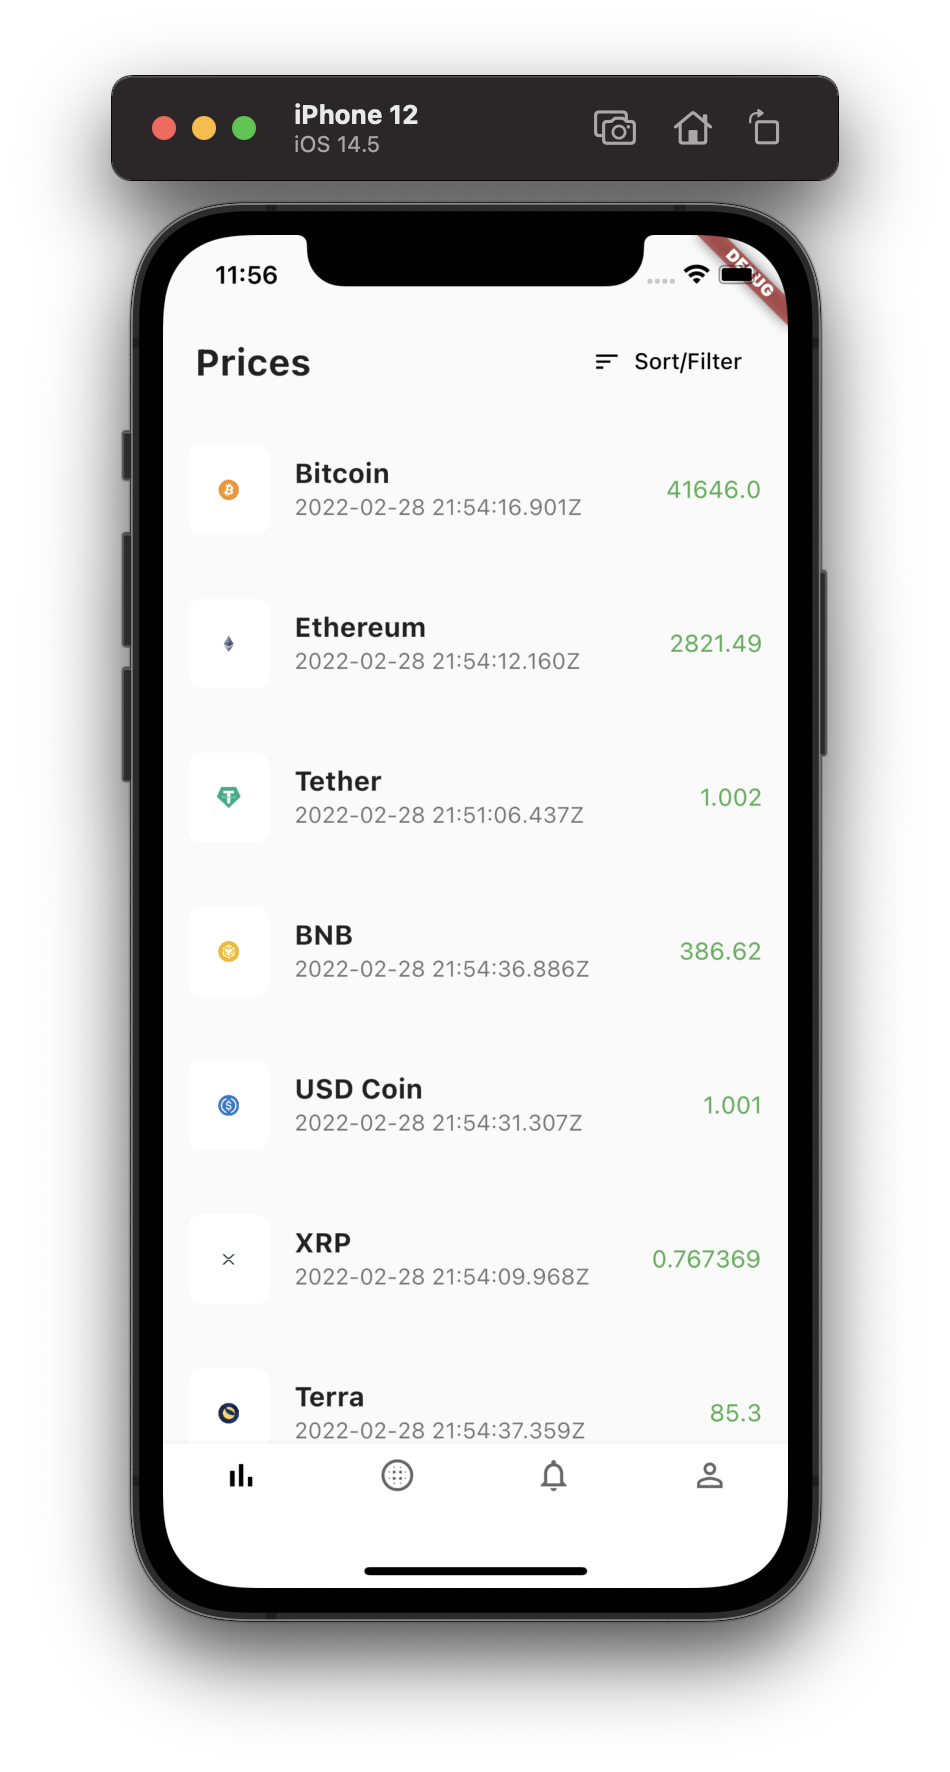 Crypto prices app built with flutter. Current prices are pulled from the Coin Gecko API